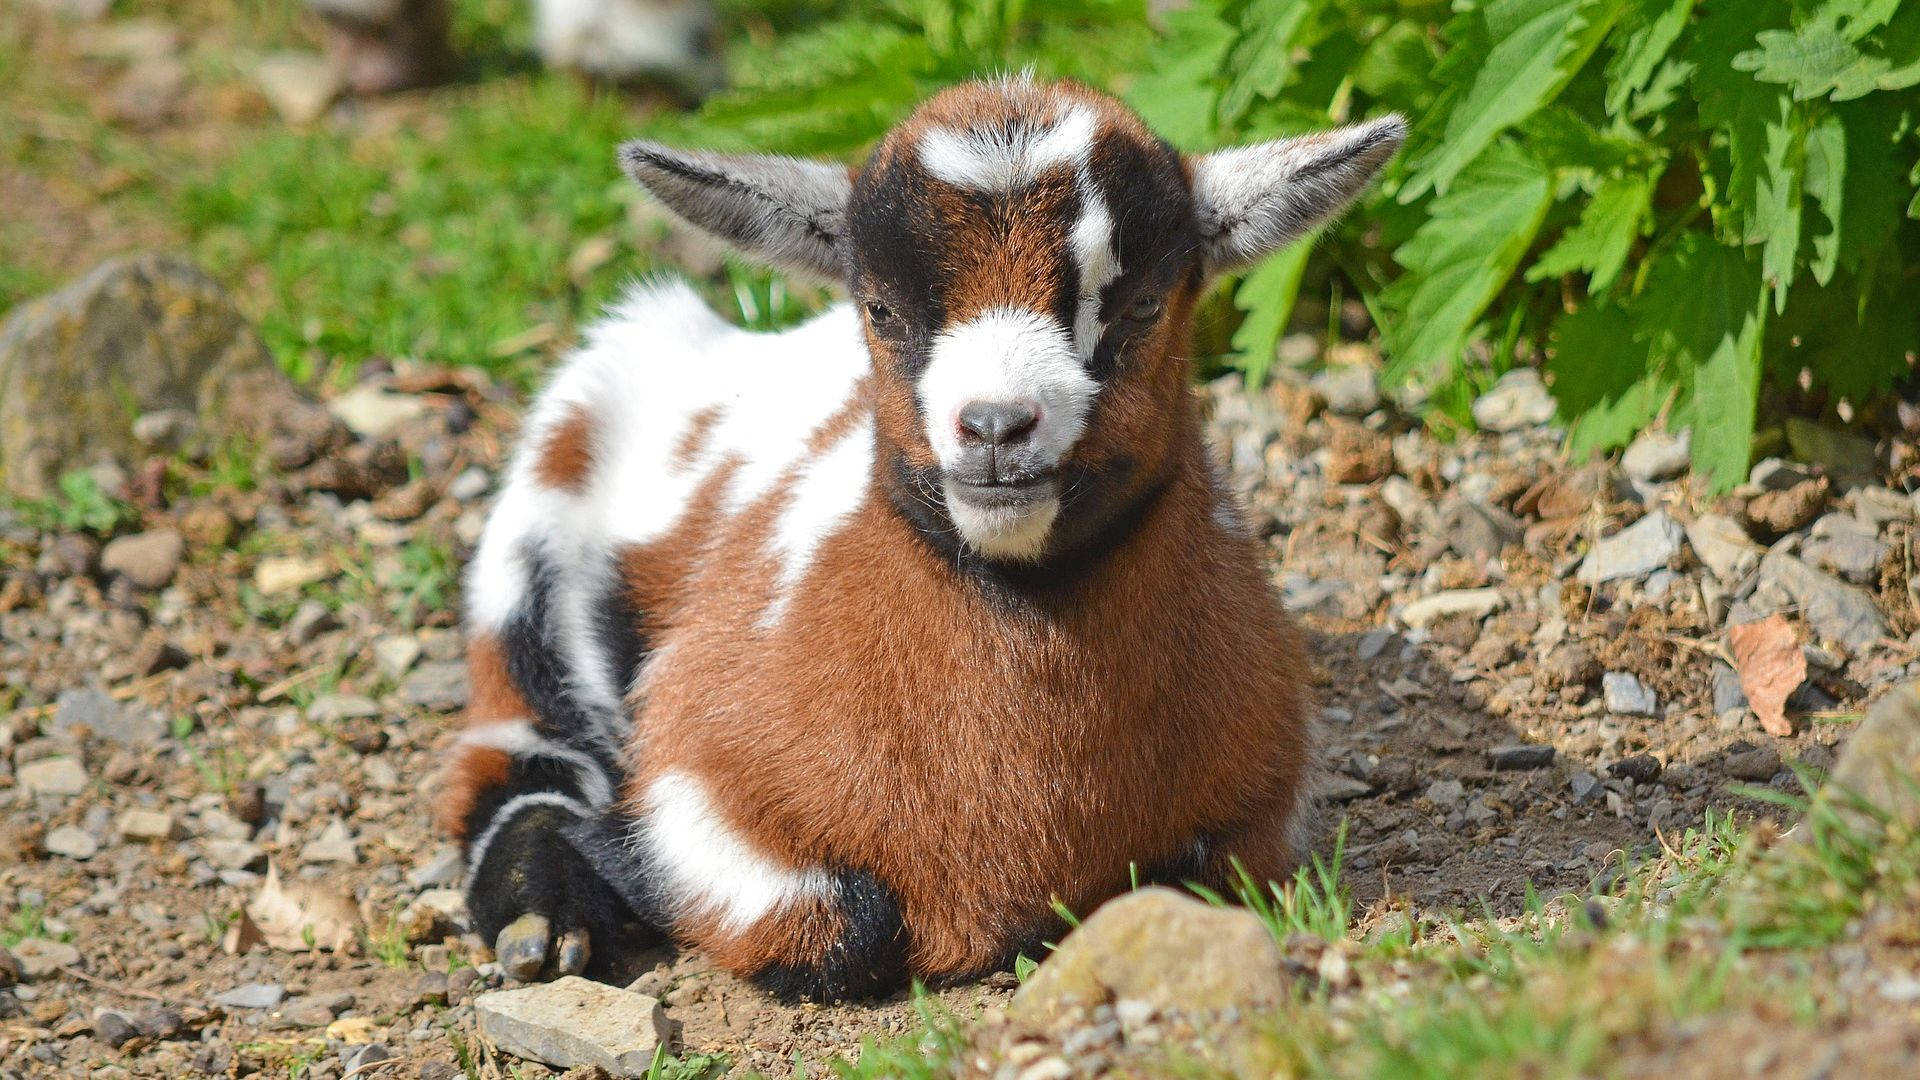 Healthy Baby Goat Sits Wallpaper